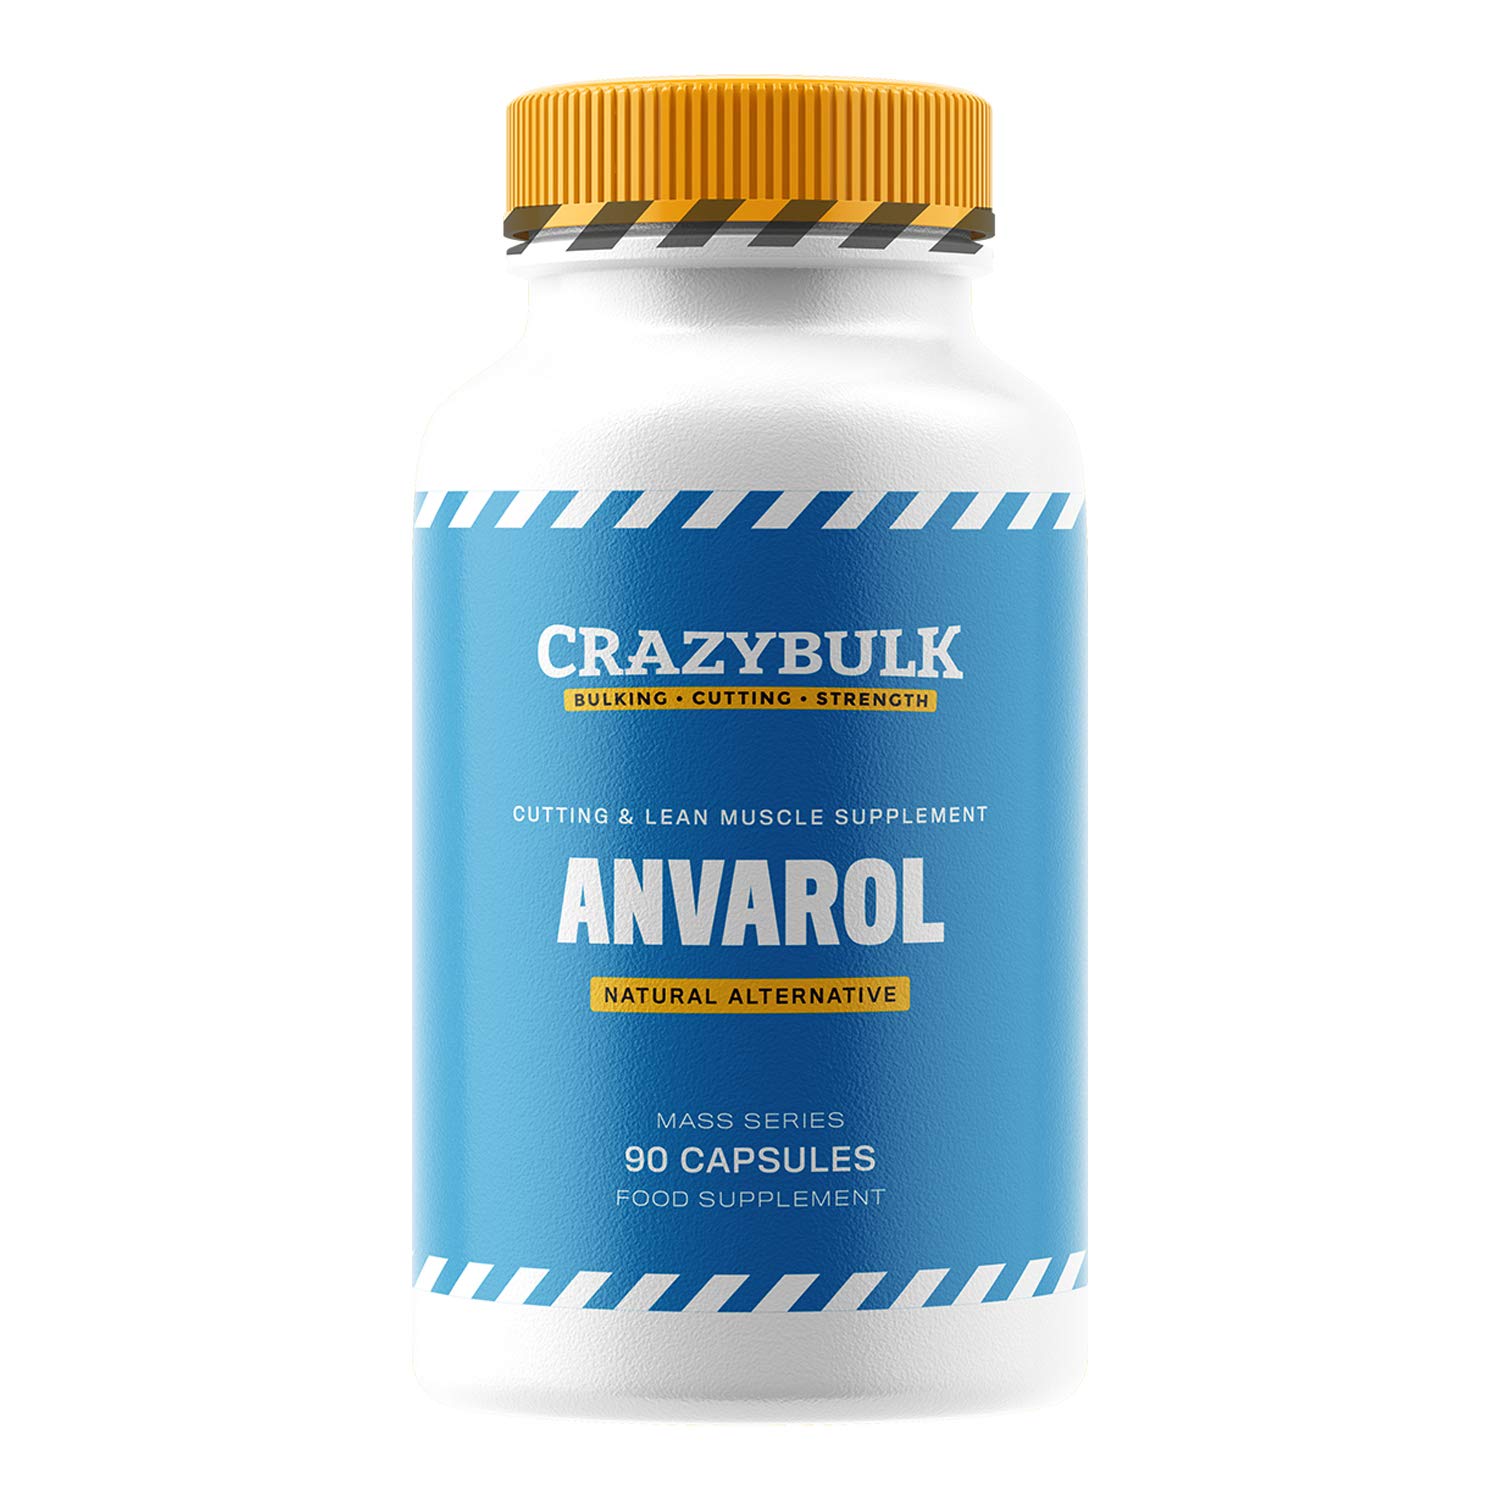 avarol - Anavar vs Peptides: What You Need to Know